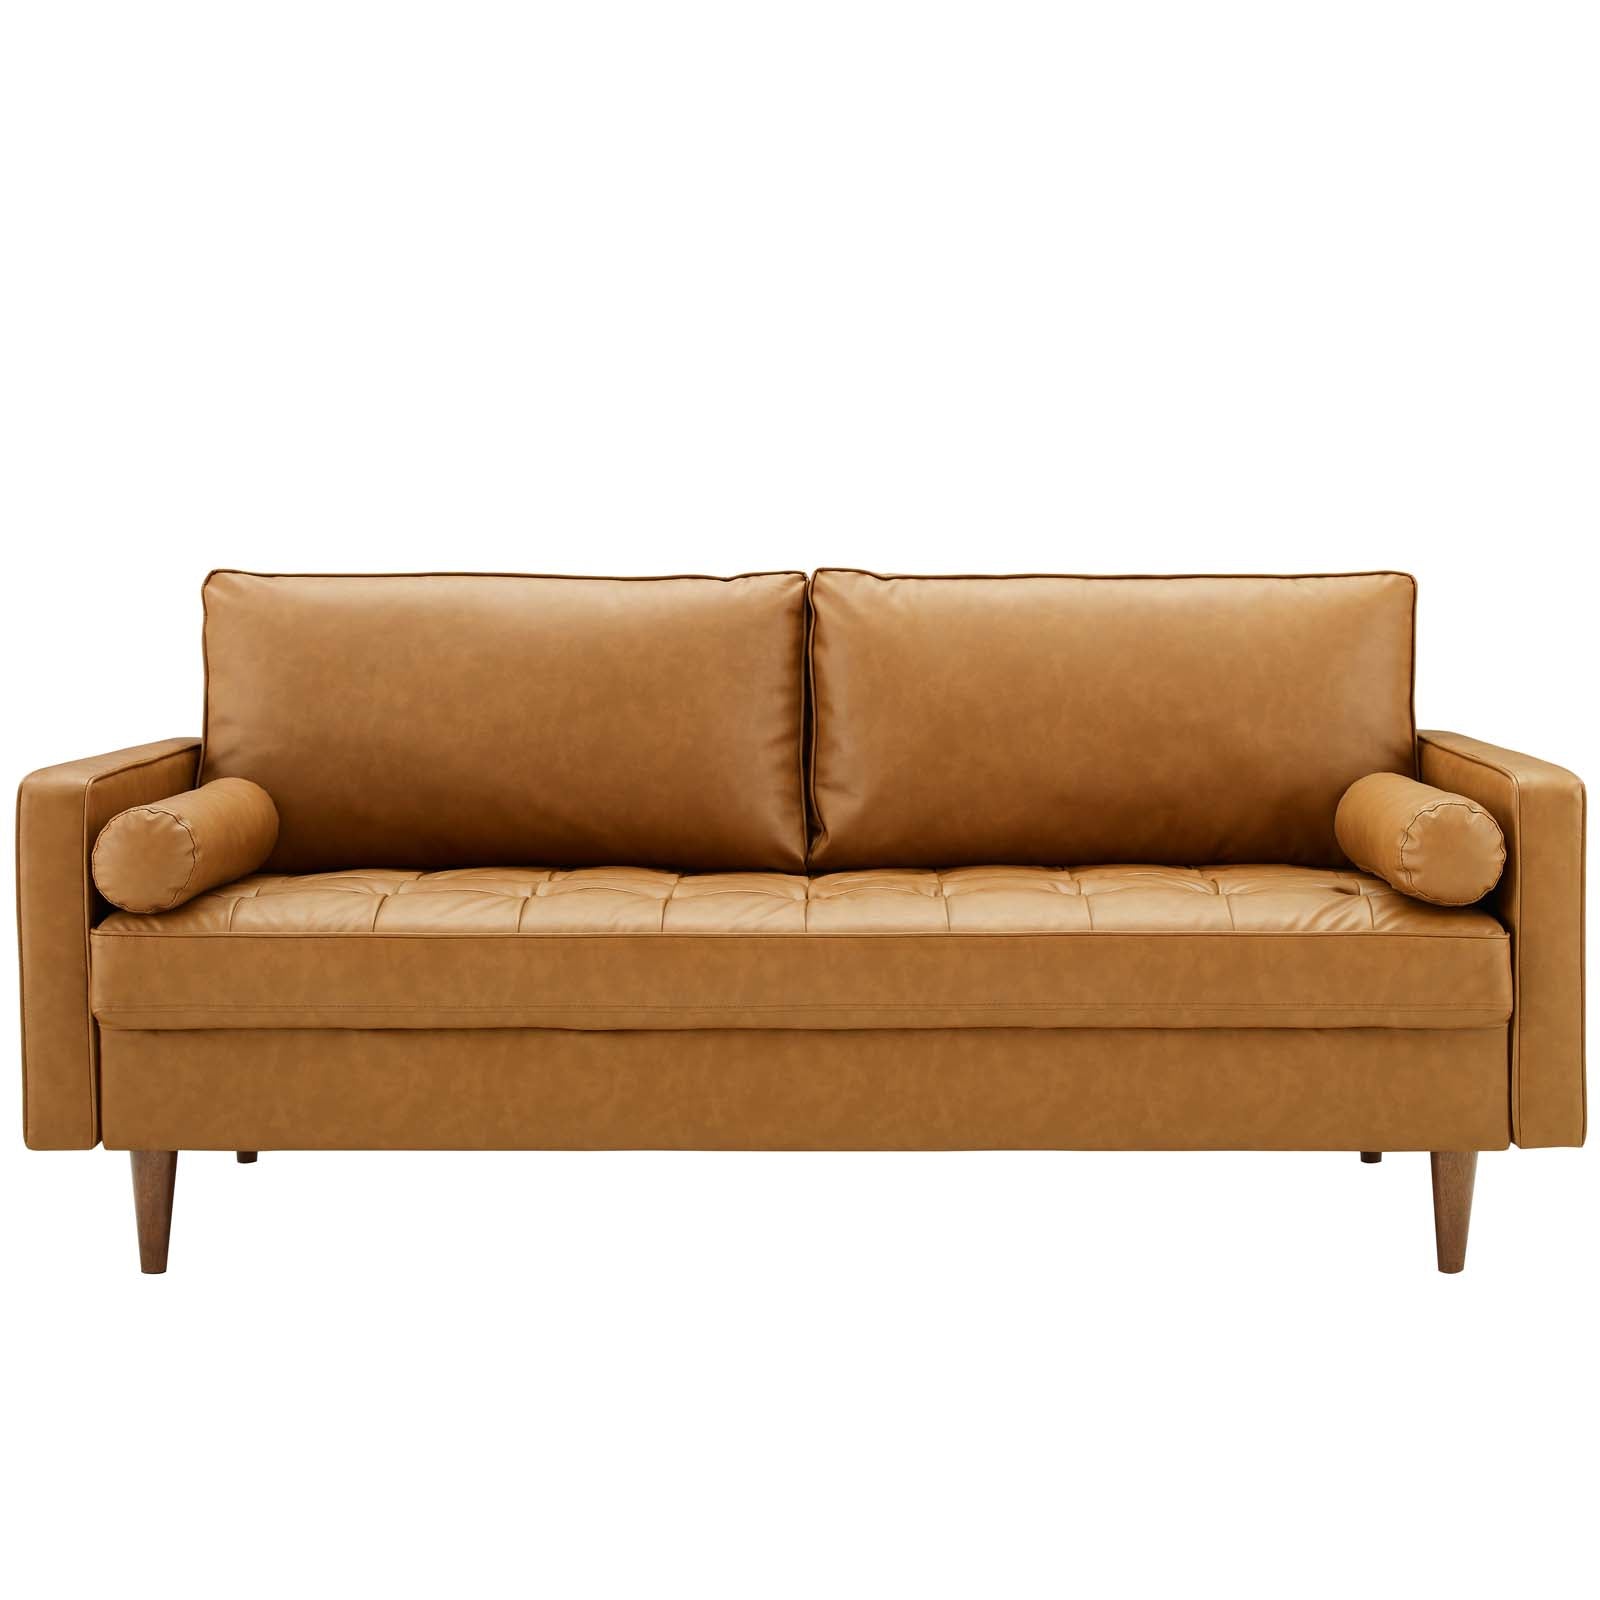 Valour Upholstered Faux Leather Sofa - East Shore Modern Home Furnishings